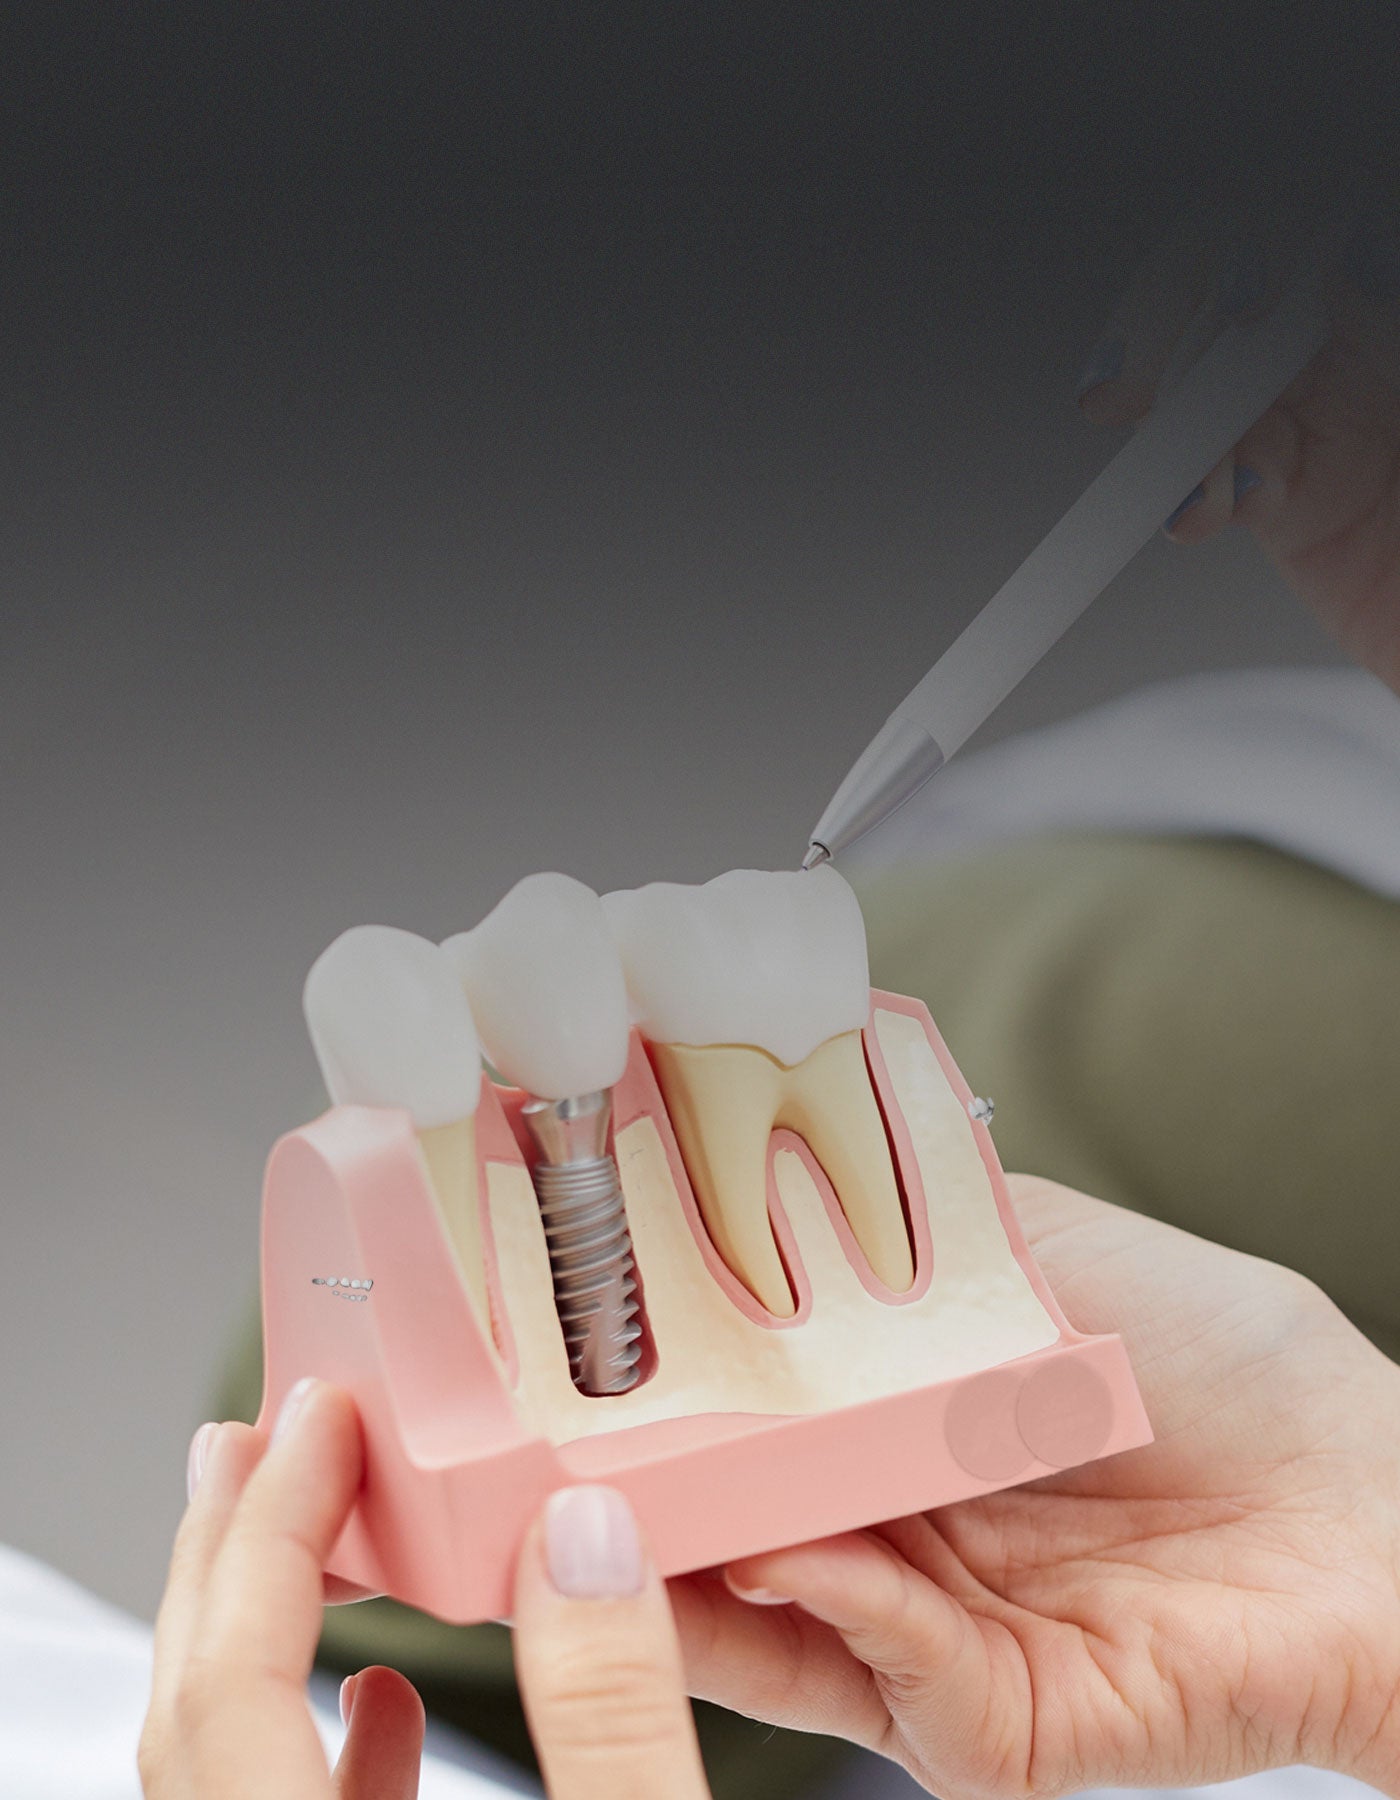 Specialist holding model of a dental implant